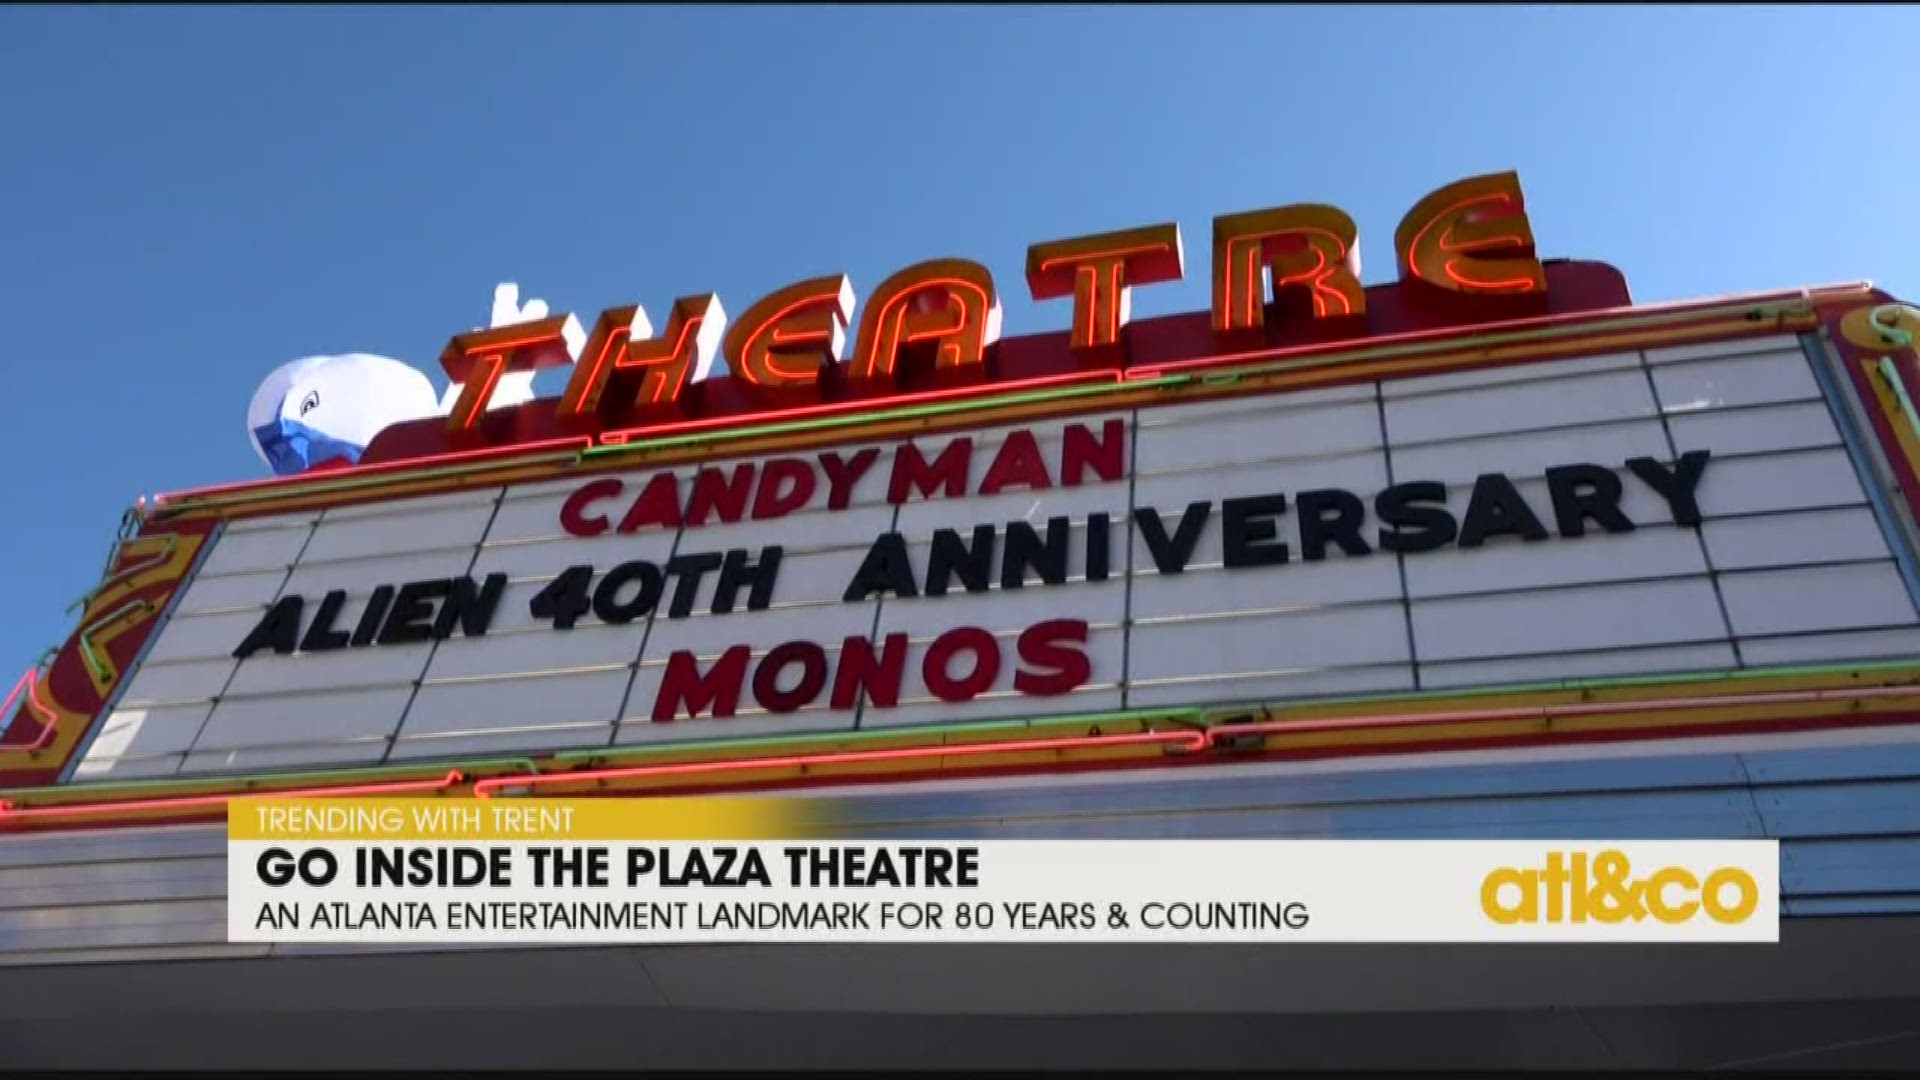 Trending with Trent goes inside Atlanta's oldest operating cinema, the Plaza Theatre, with owner Chris Escobar.